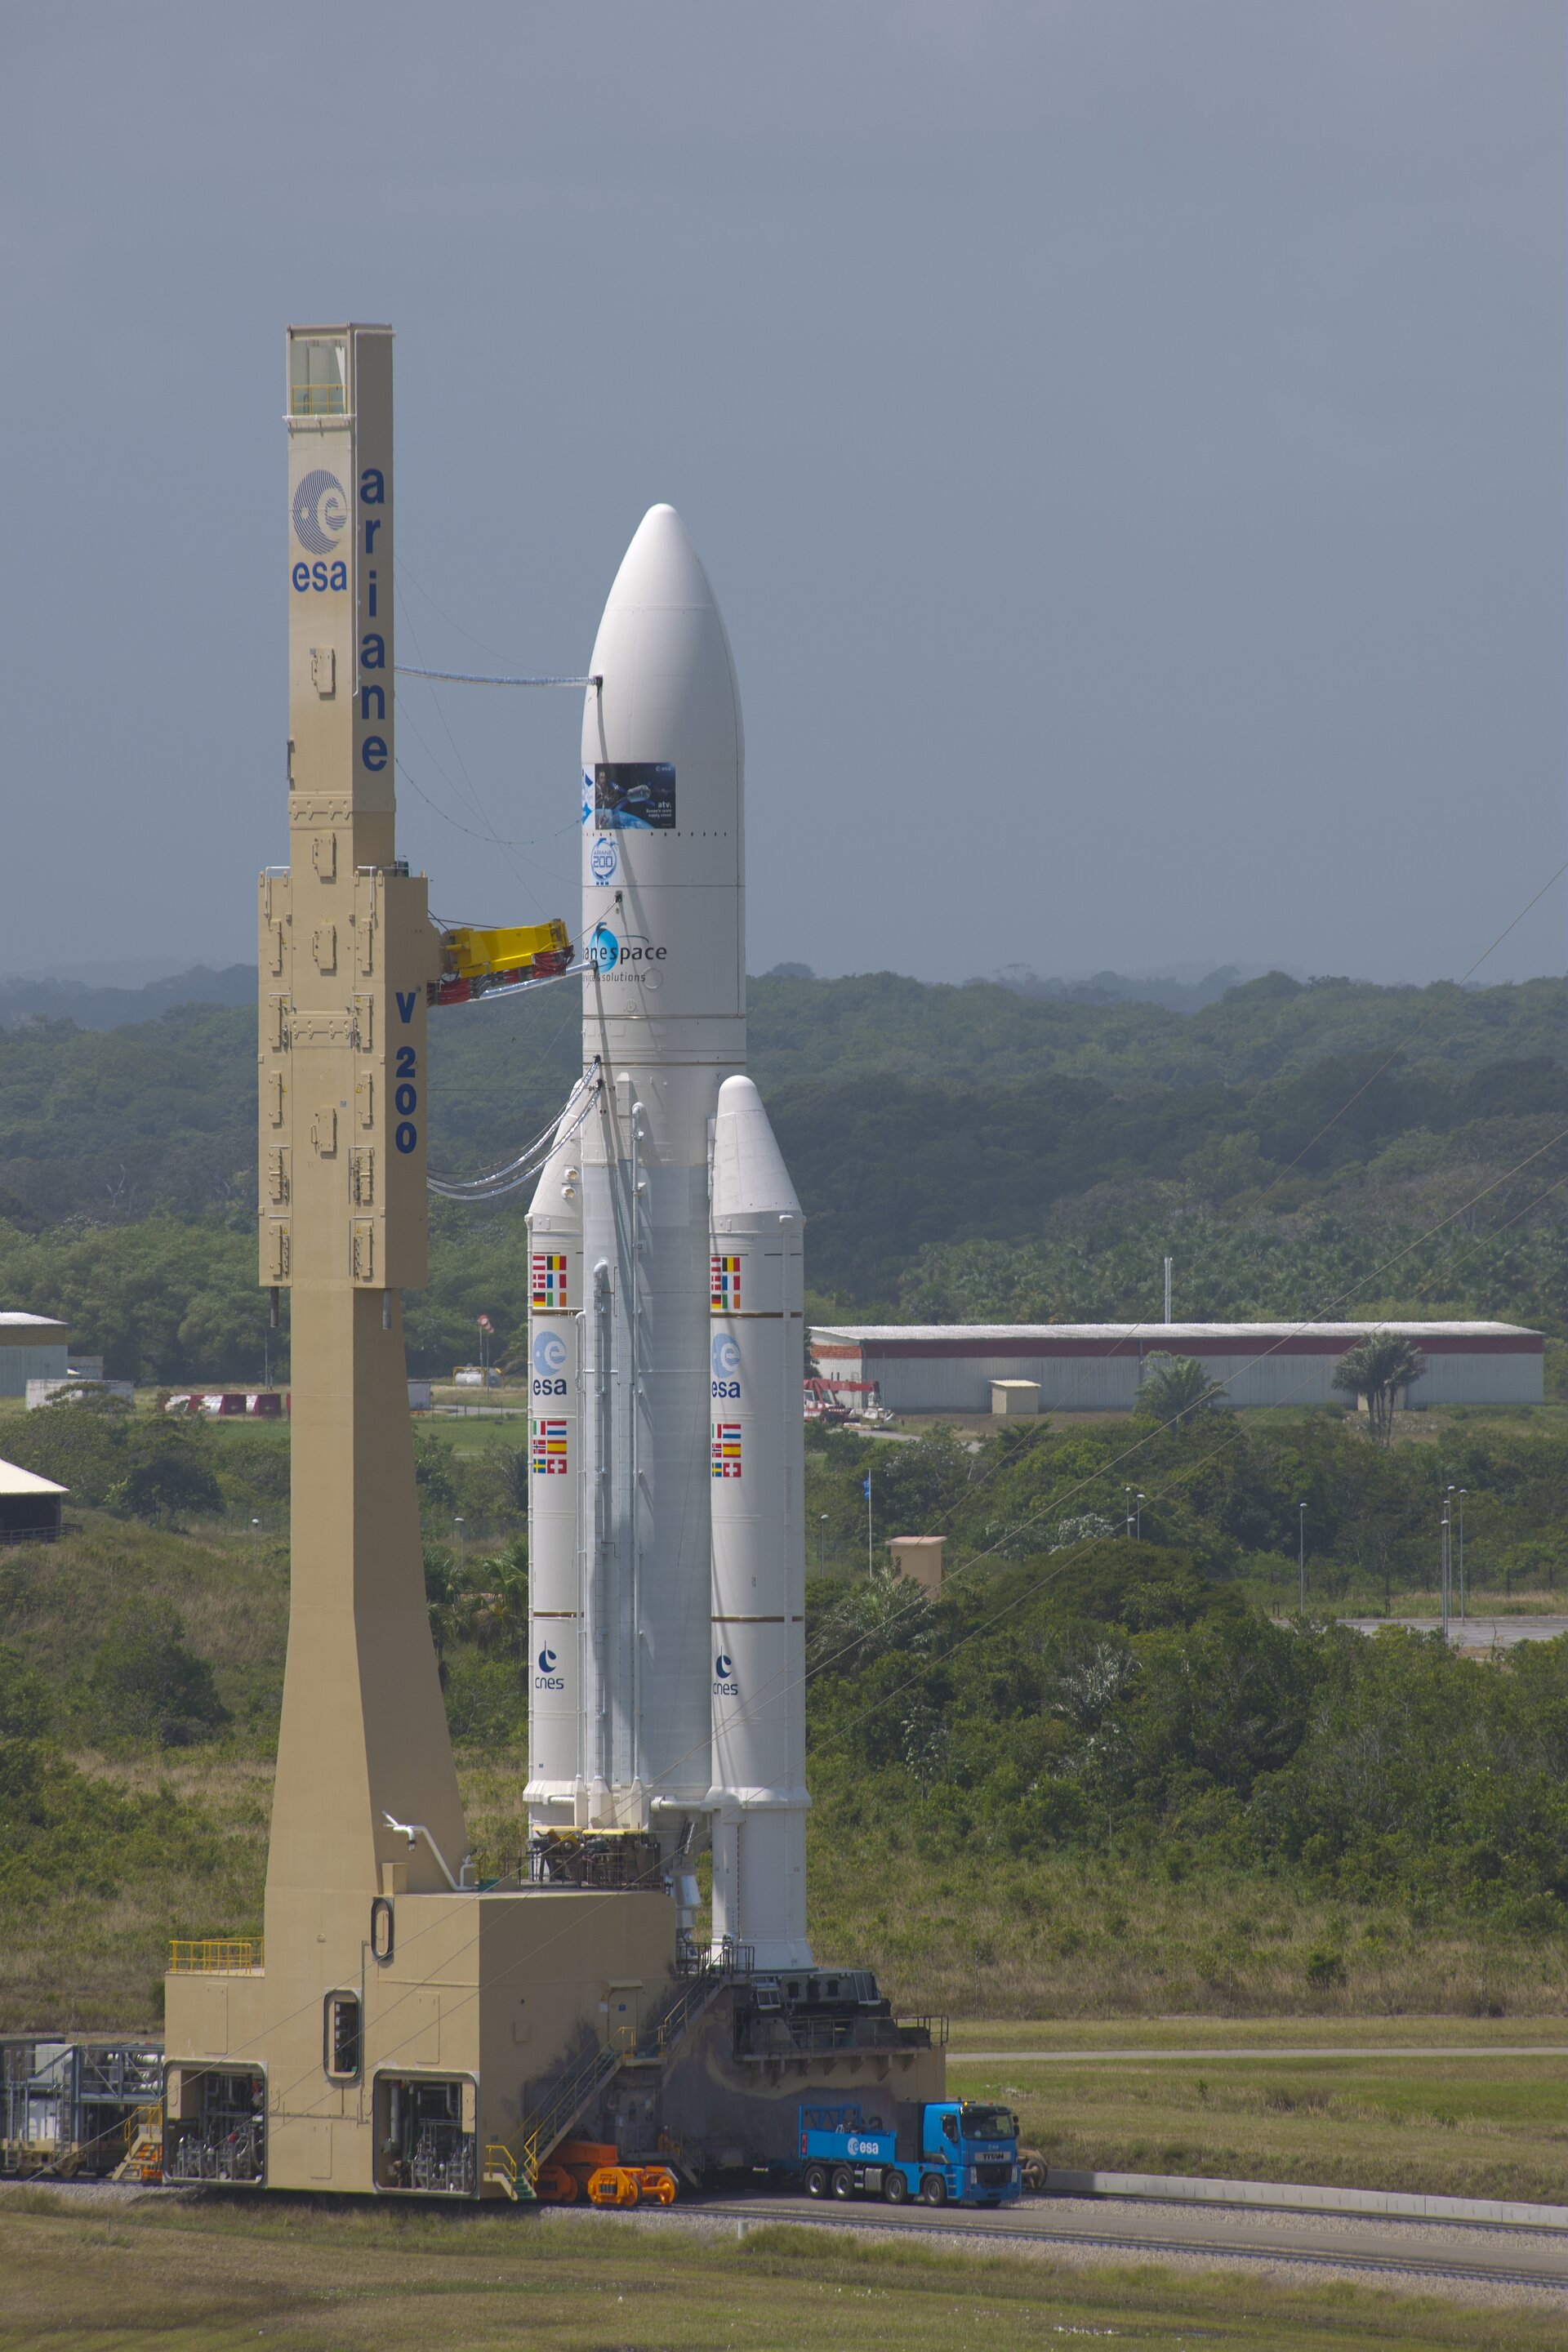 Ariane 5 roll-out